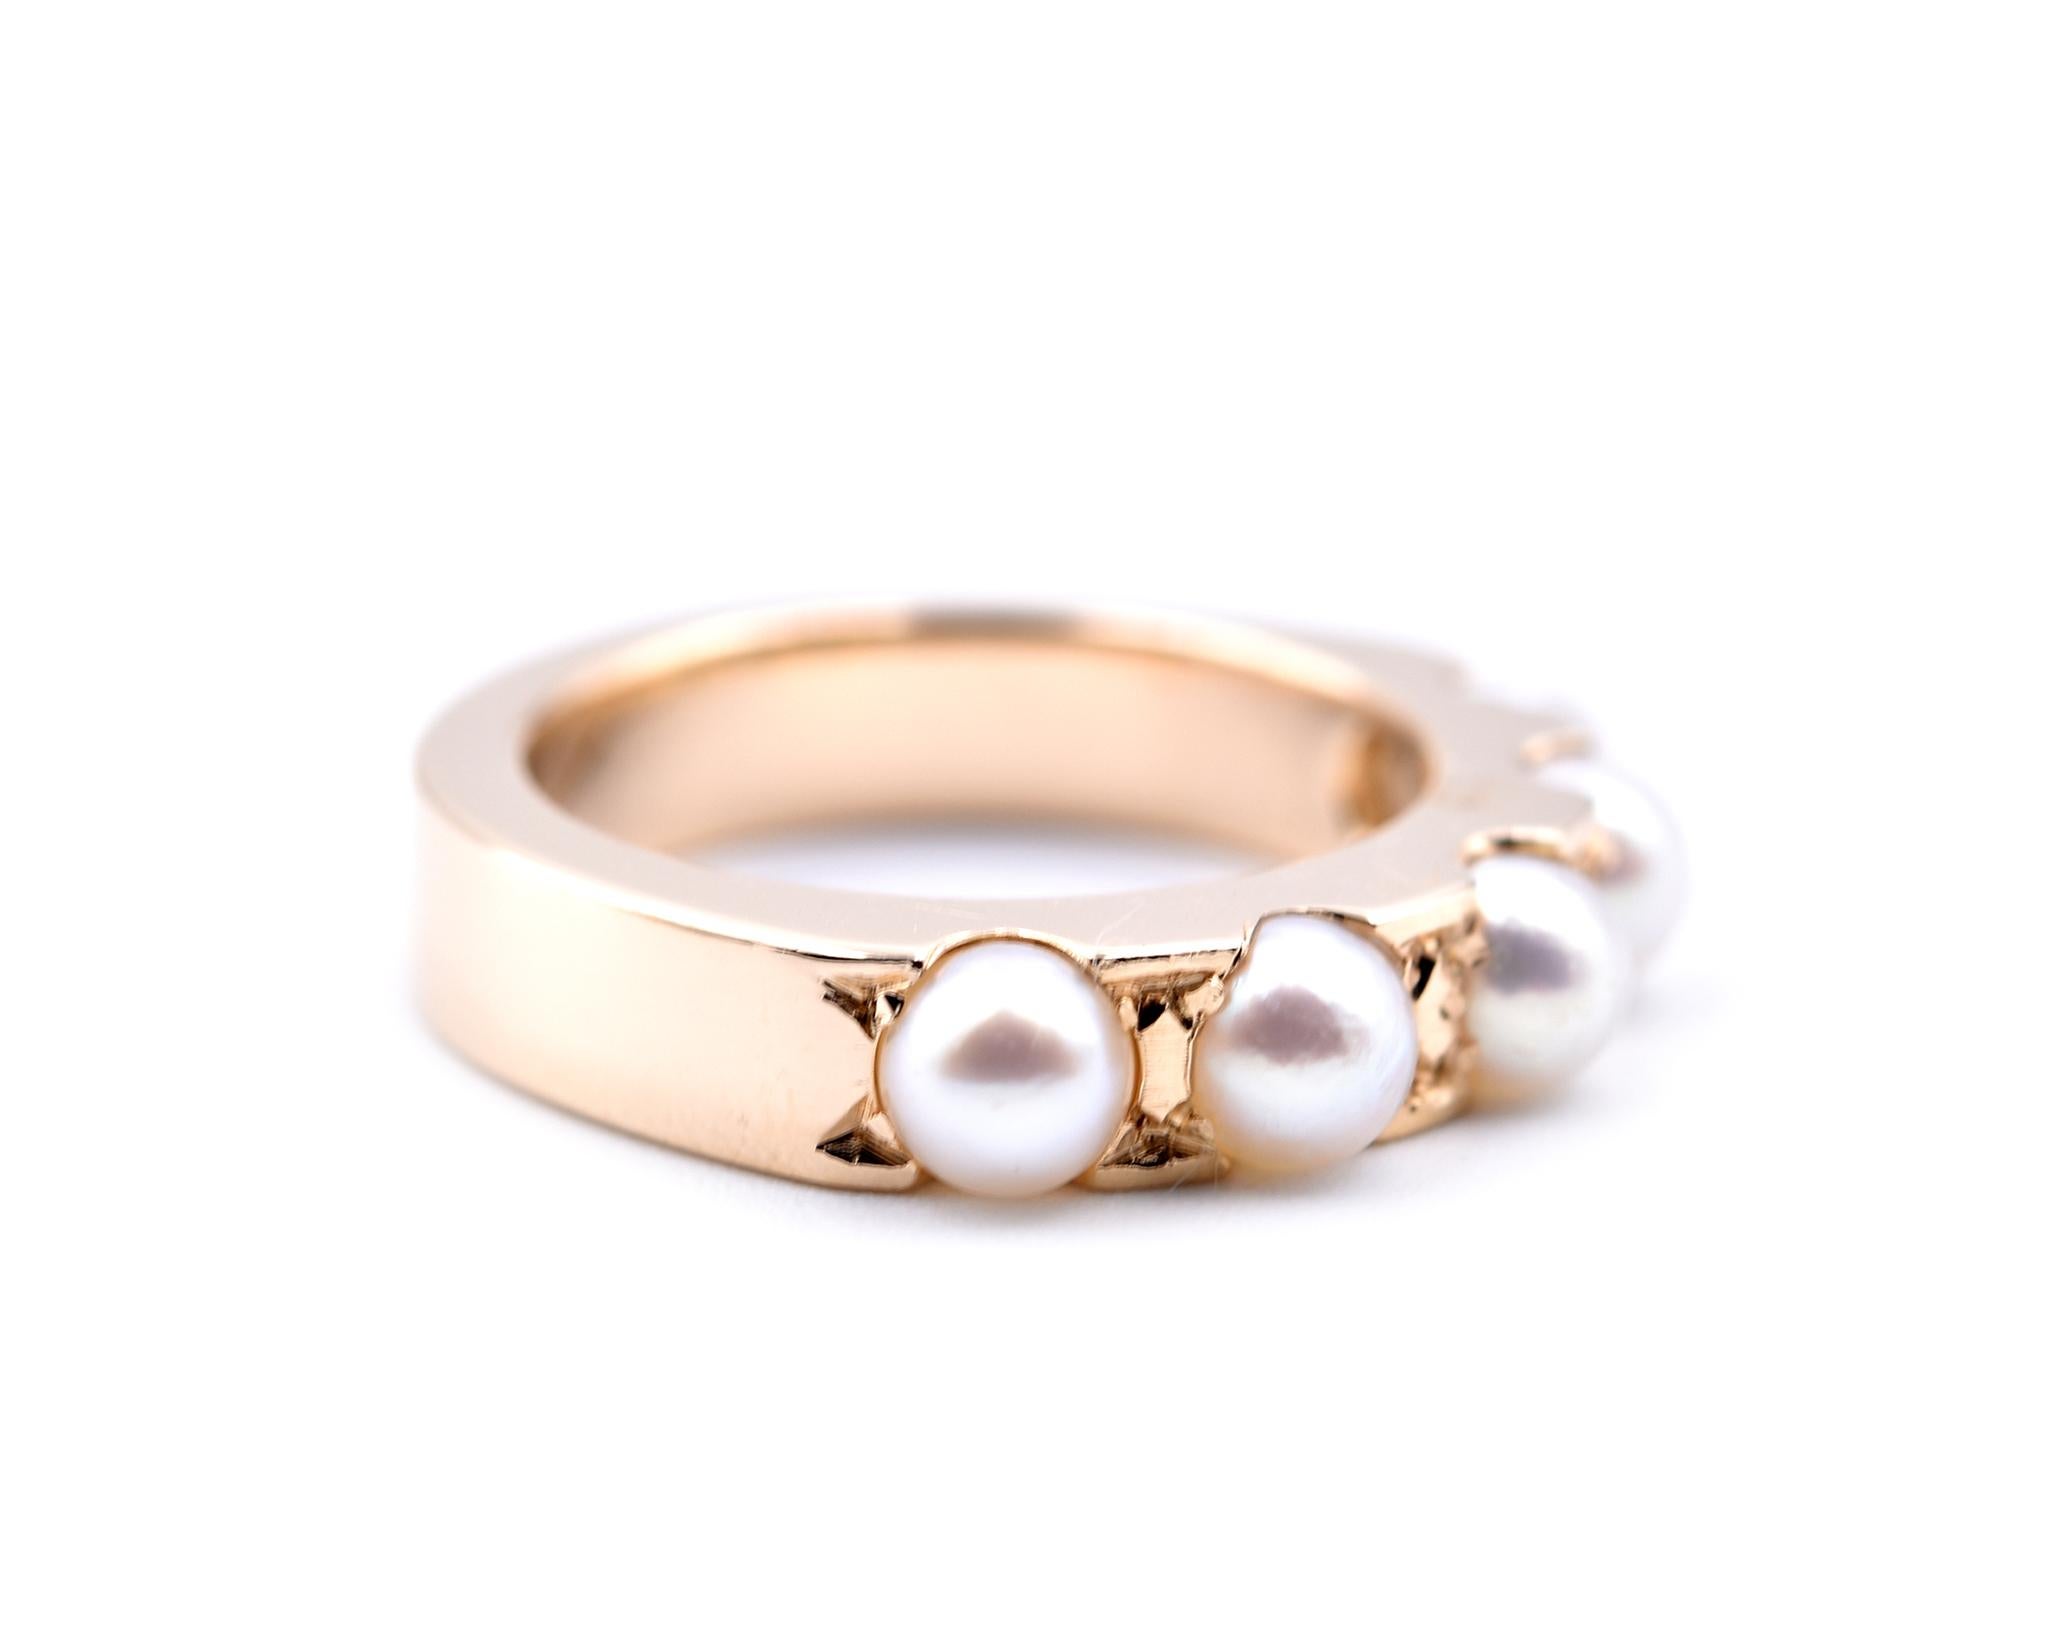 Designer: custom design
Material: 14k white gold
Cultured Pearl: 5 pearls 4mm
Ring Size: 4 (please allow two additional shipping days for sizing requests)
Dimensions: ring is 4mm wide
Weight:  5.73 grams